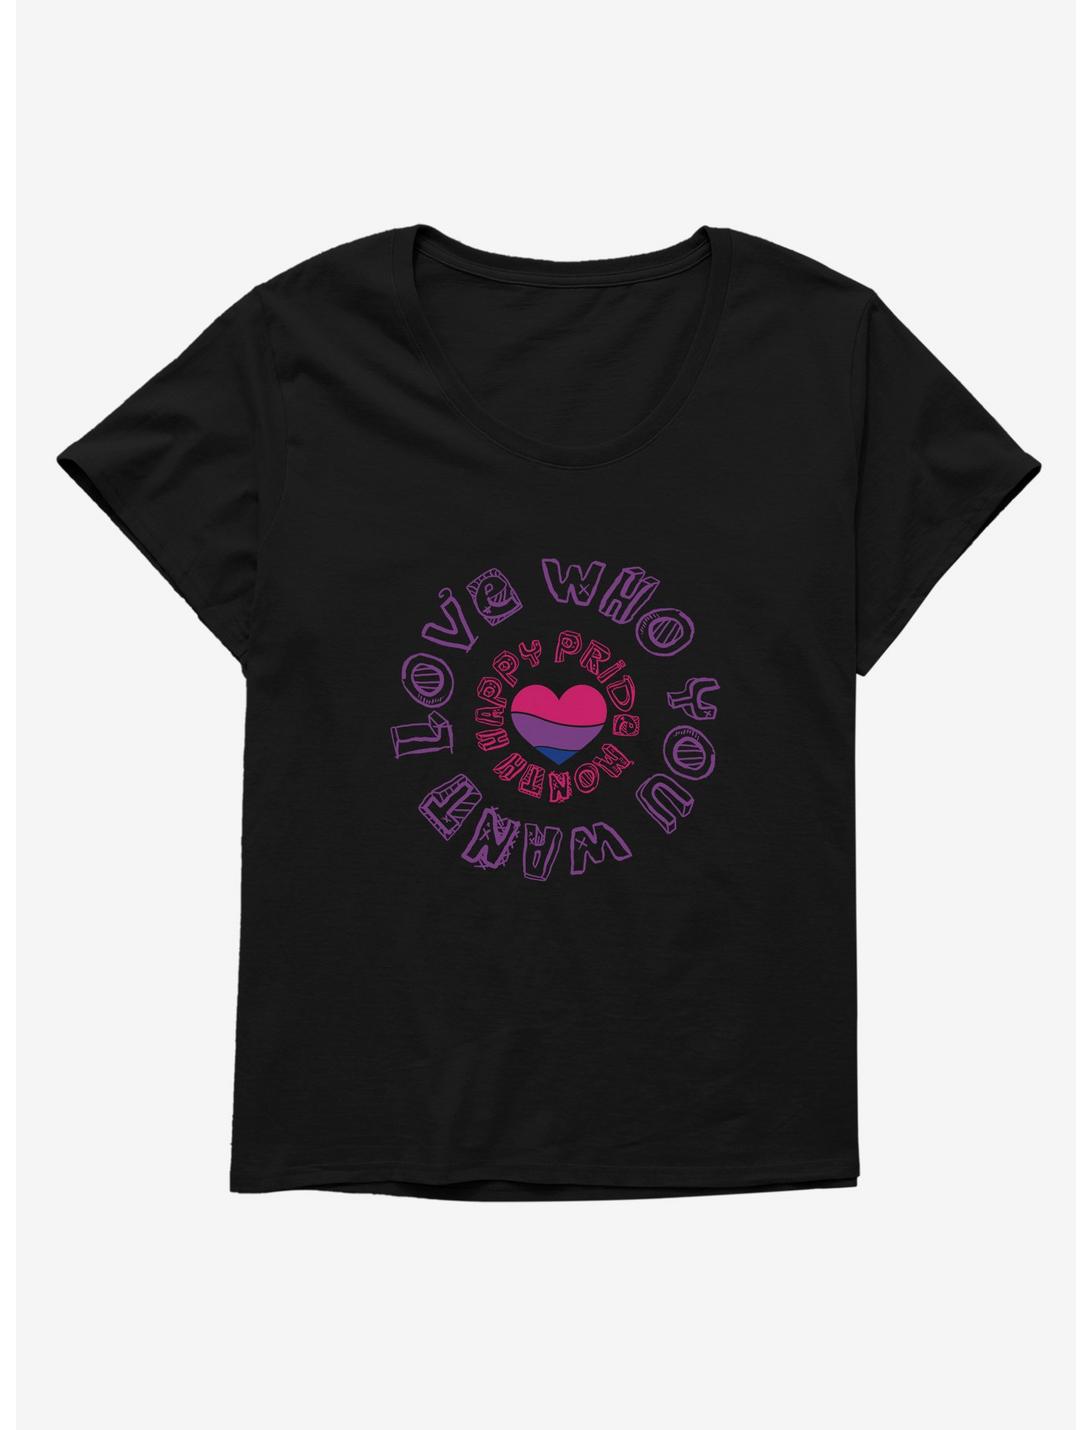 Pride Bisexual Heart Love Who You Want Womens T-Shirt Plus Size, BLACK, hi-res